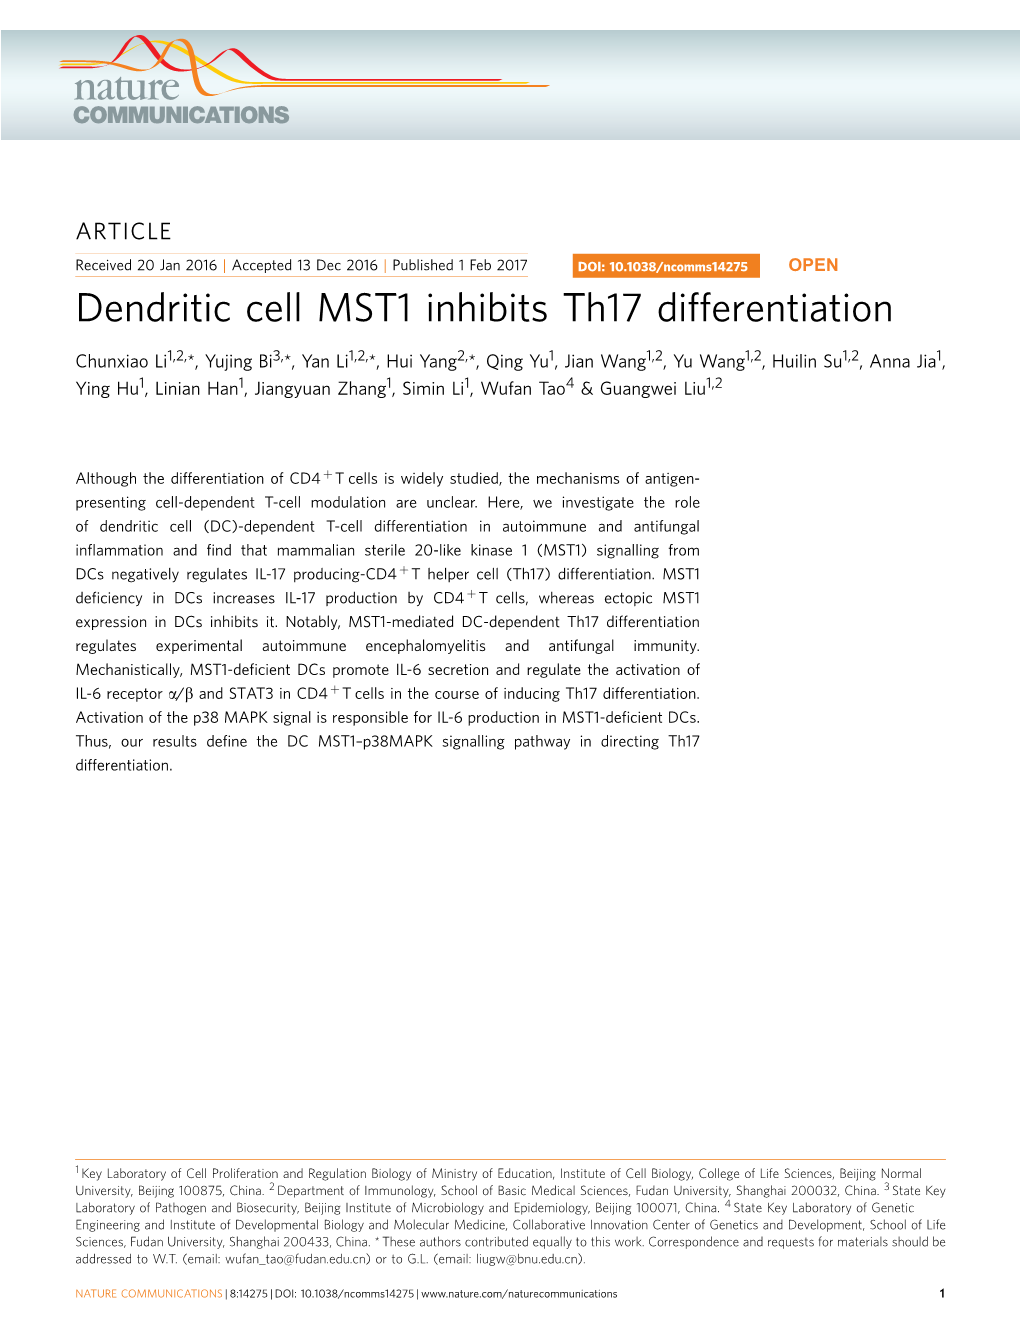 Dendritic Cell MST1 Inhibits Th17 Differentiation